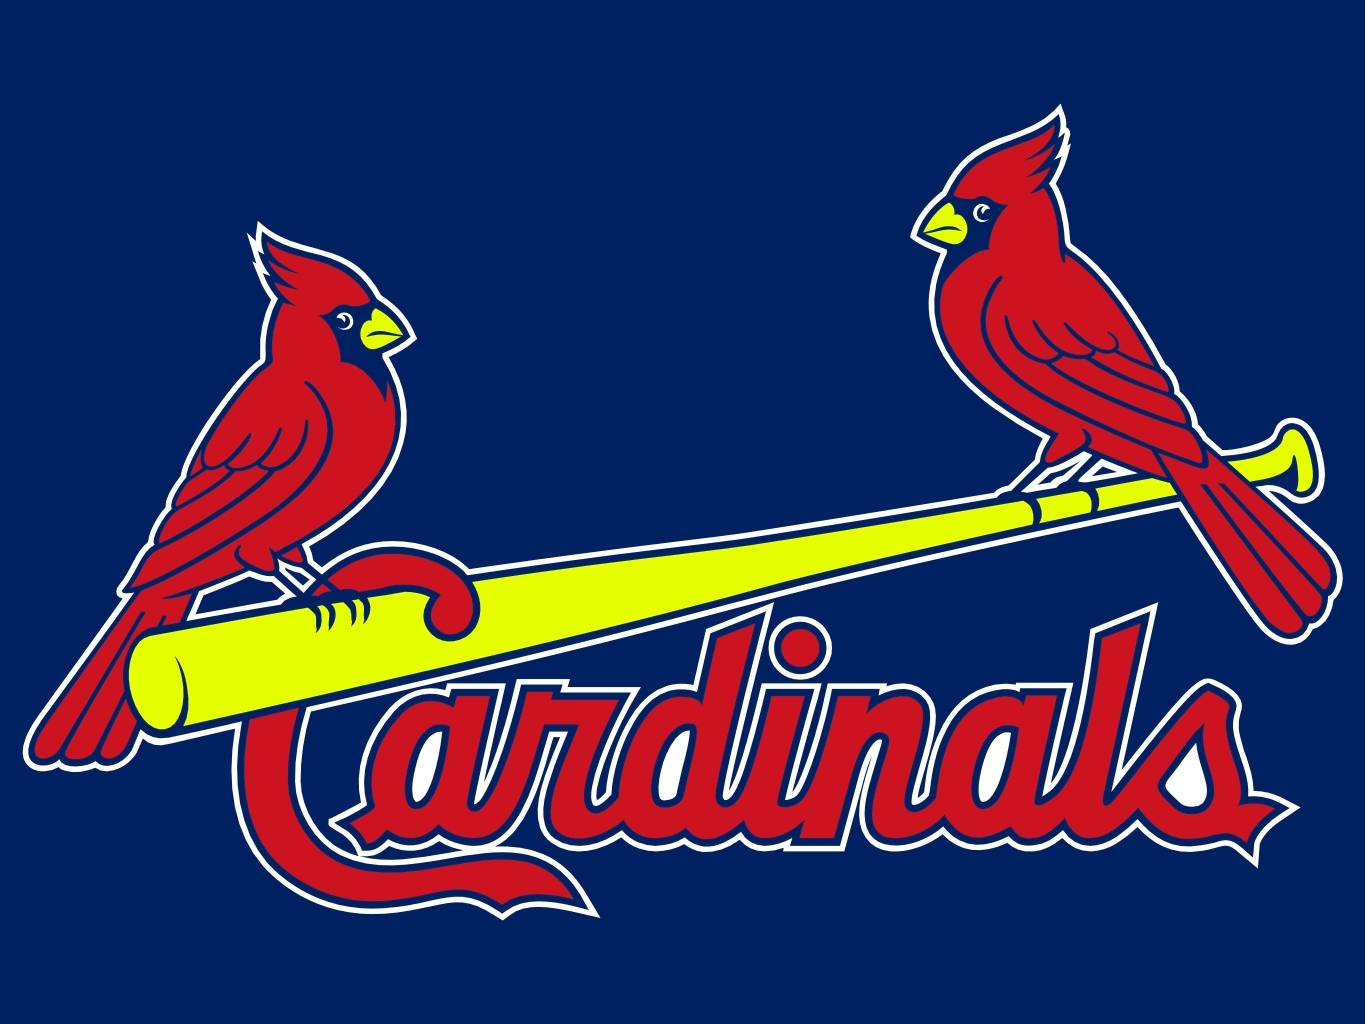 St Louis Cardinals Logo Images | Free download on ClipArtMag